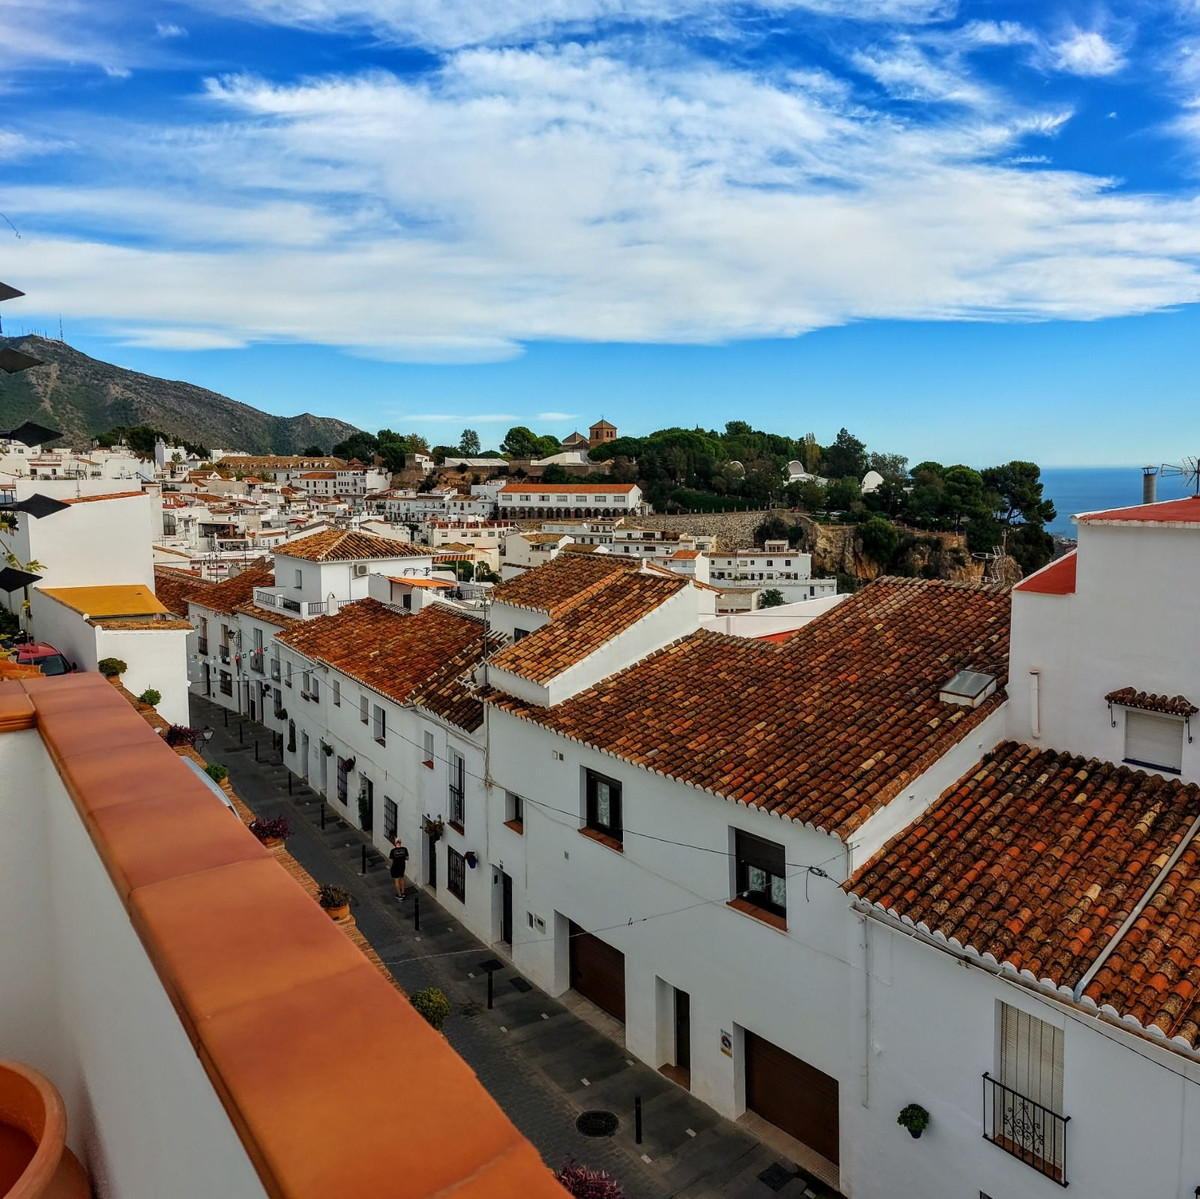 						Apartment  Penthouse
													for sale 
																			 in Mijas
					